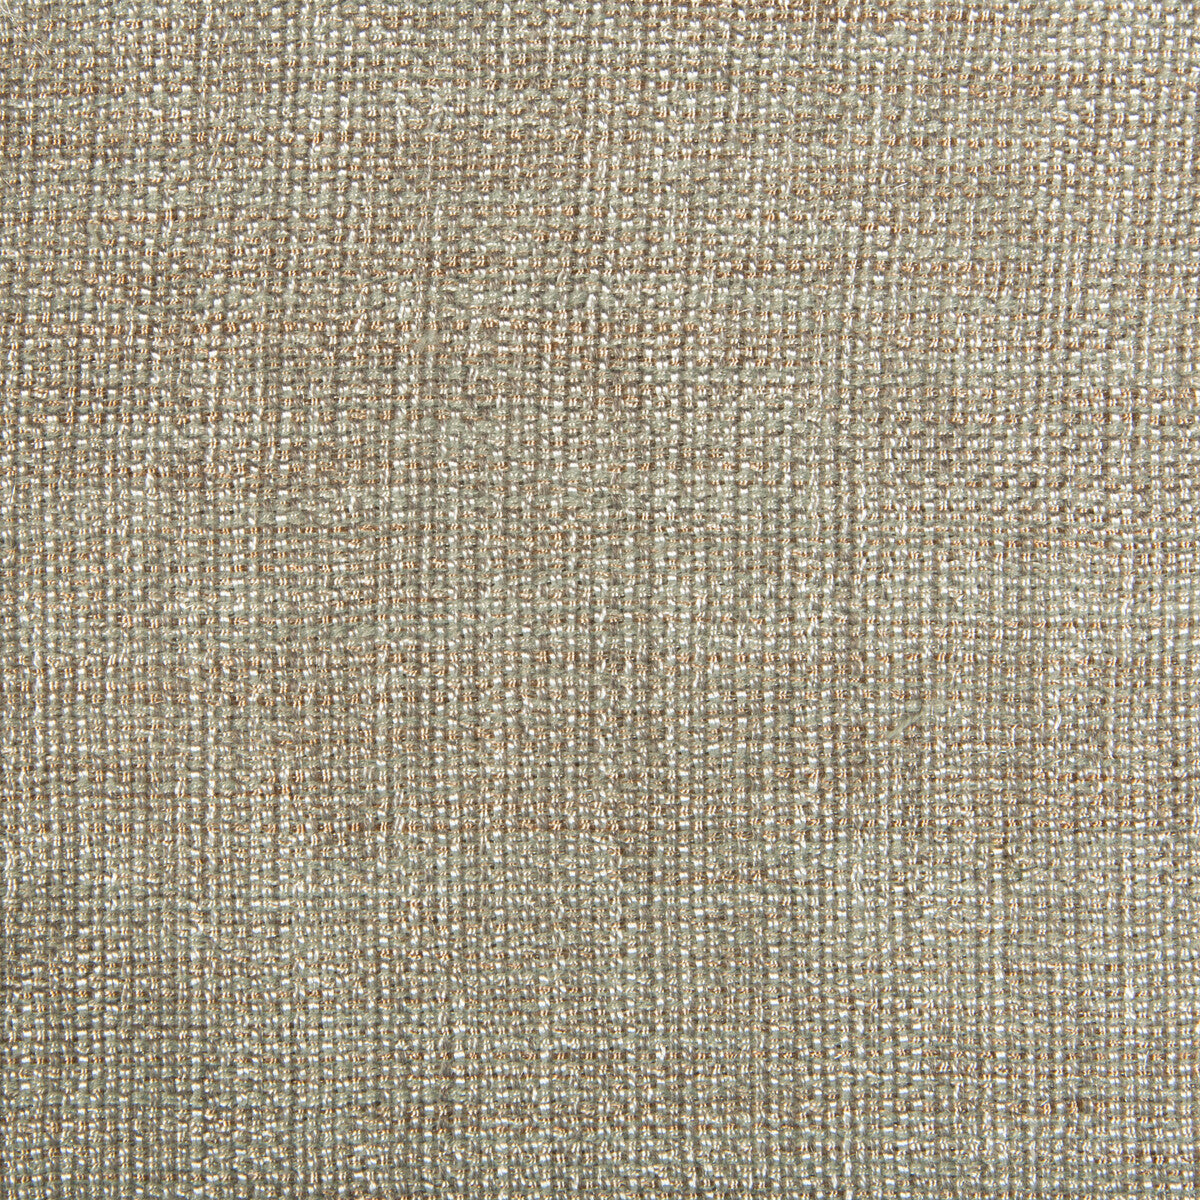 Kravet Contract fabric in 34926-1101 color - pattern 34926.1101.0 - by Kravet Contract